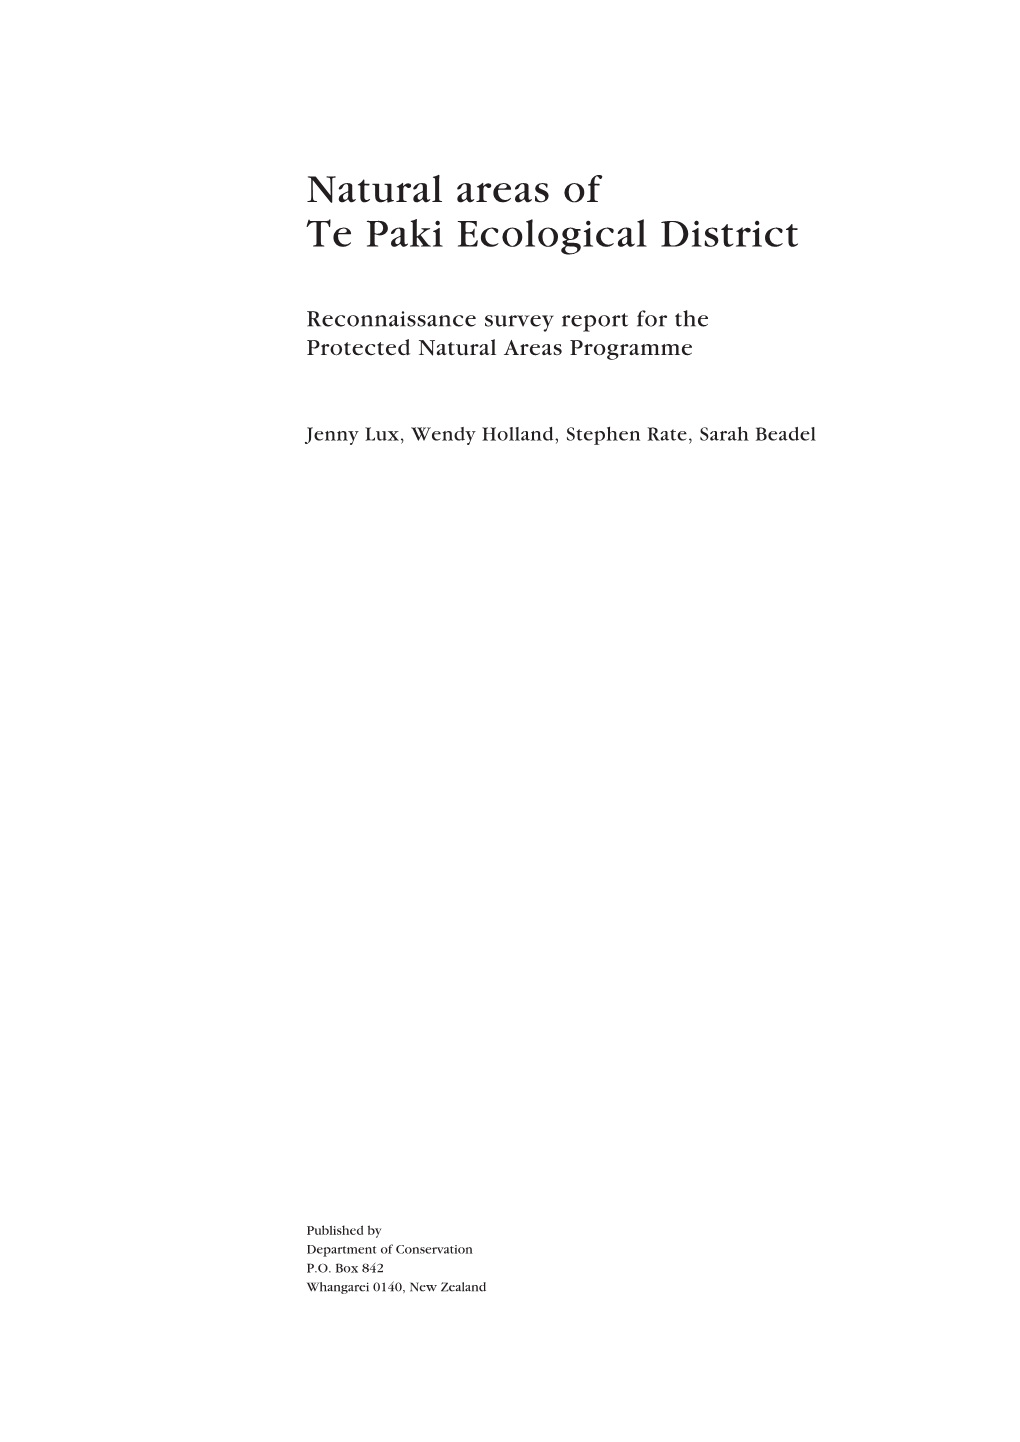 Natural Areas of Te Paki Ecological District